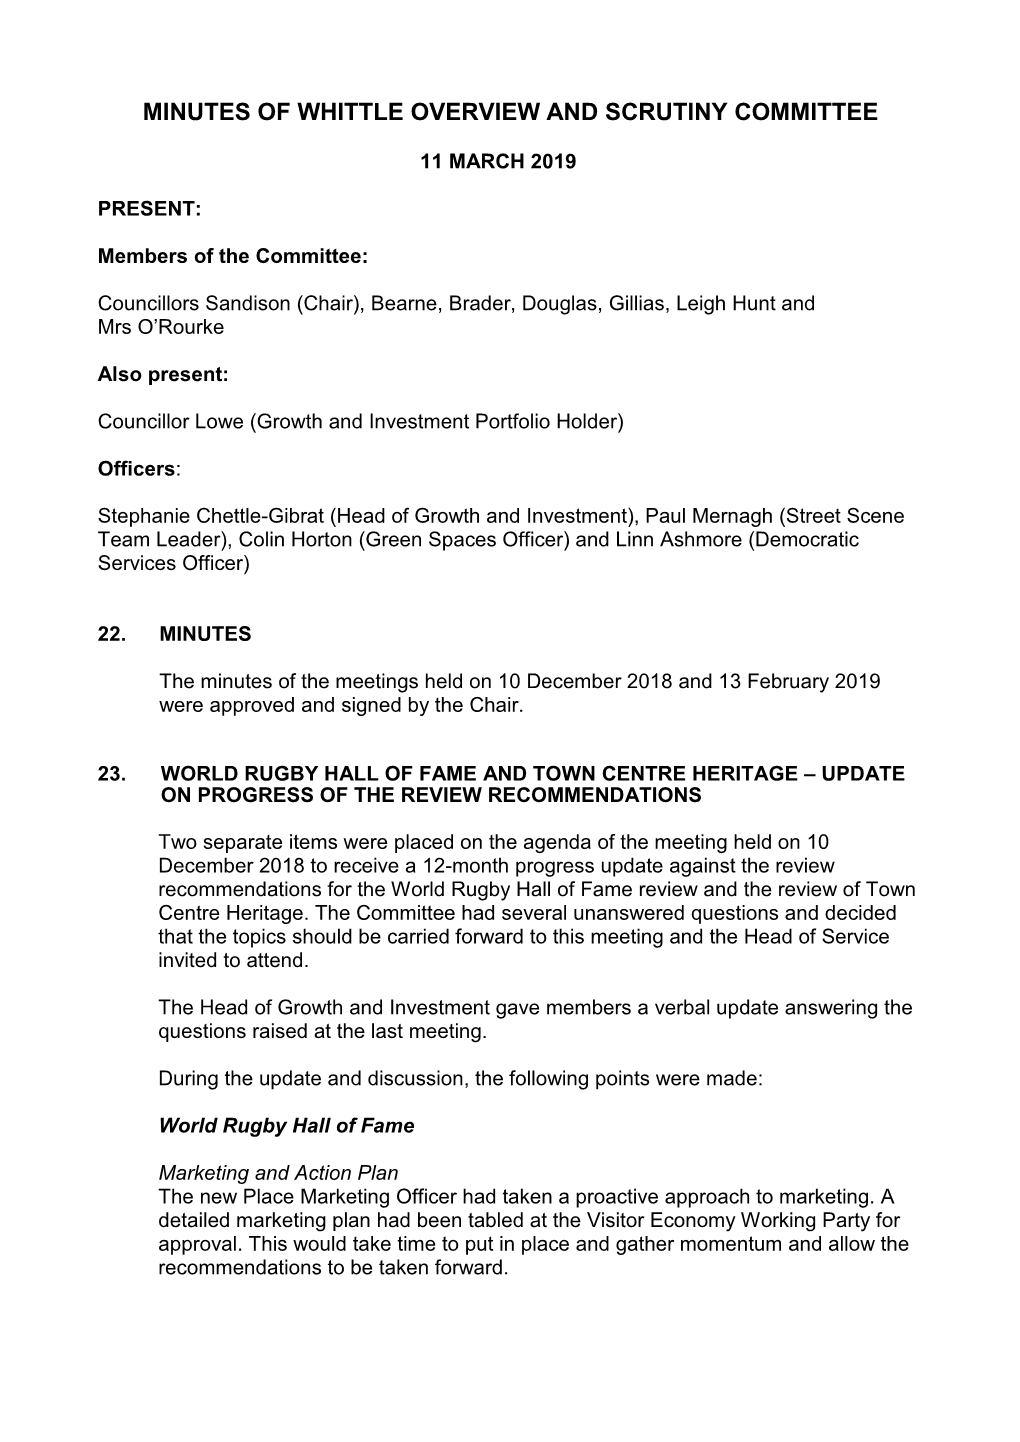 Minutes of Whittle Overview and Scrutiny Committee